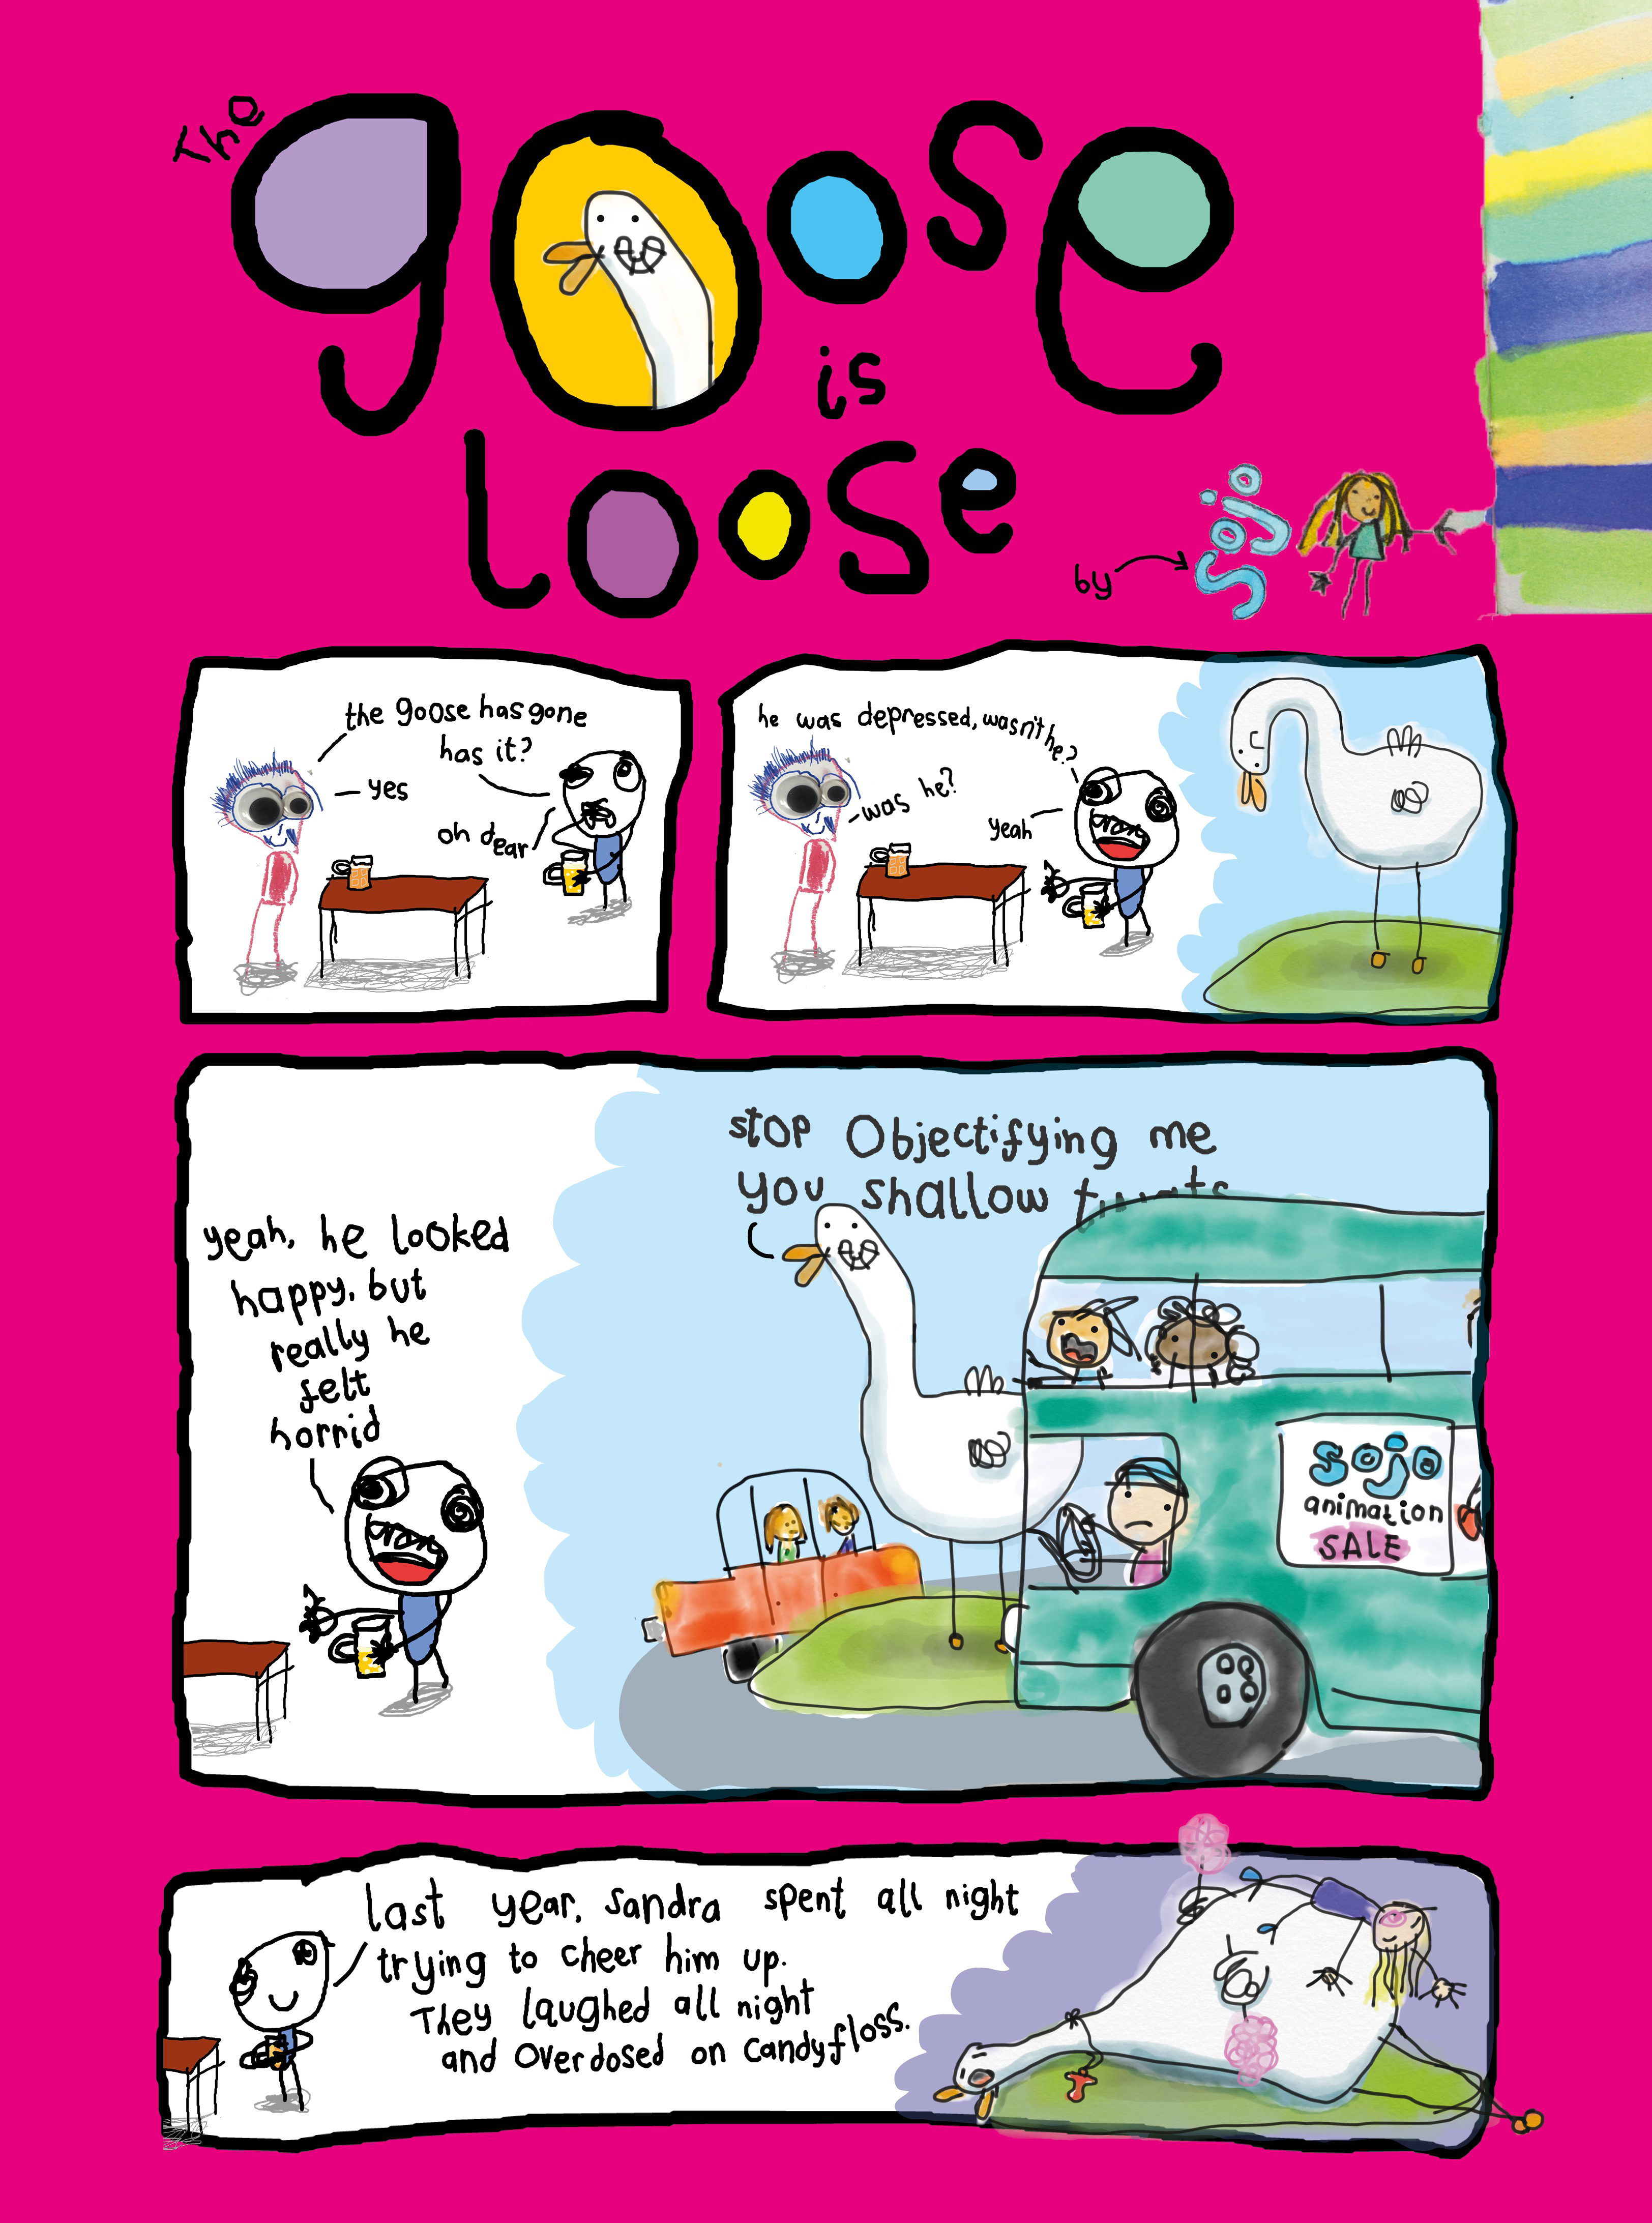 sojo-animation-the-goose-is-loose.jpg